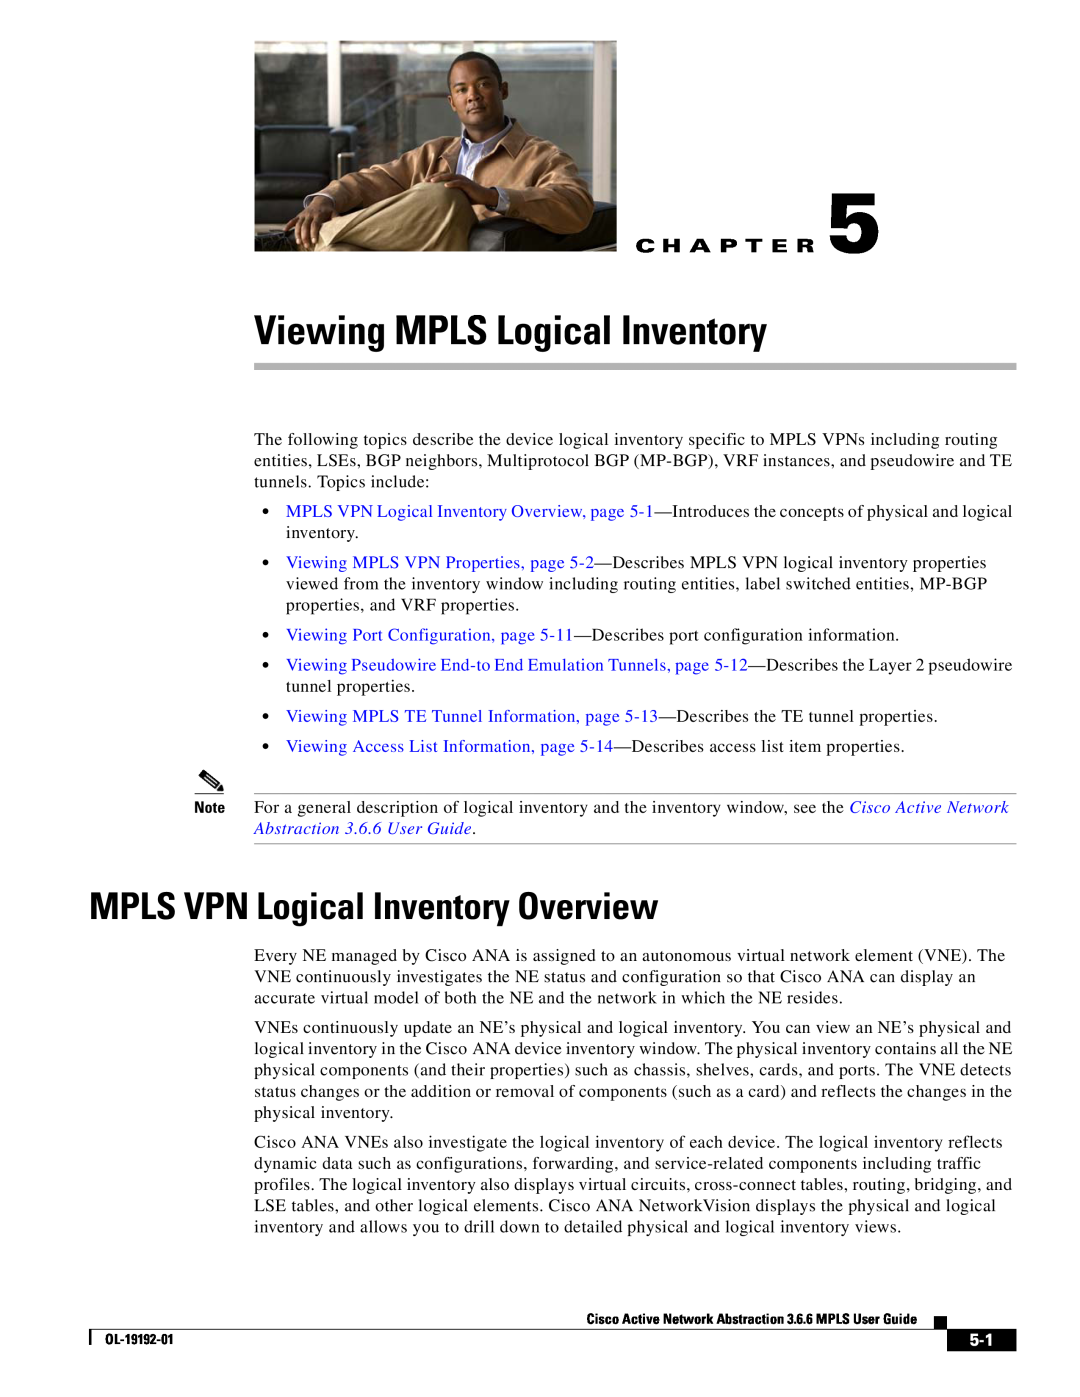 Cisco Systems 3.6.6 manual Viewing MPLS Logical Inventory, MPLS VPN Logical Inventory Overview, C H A P T E R 